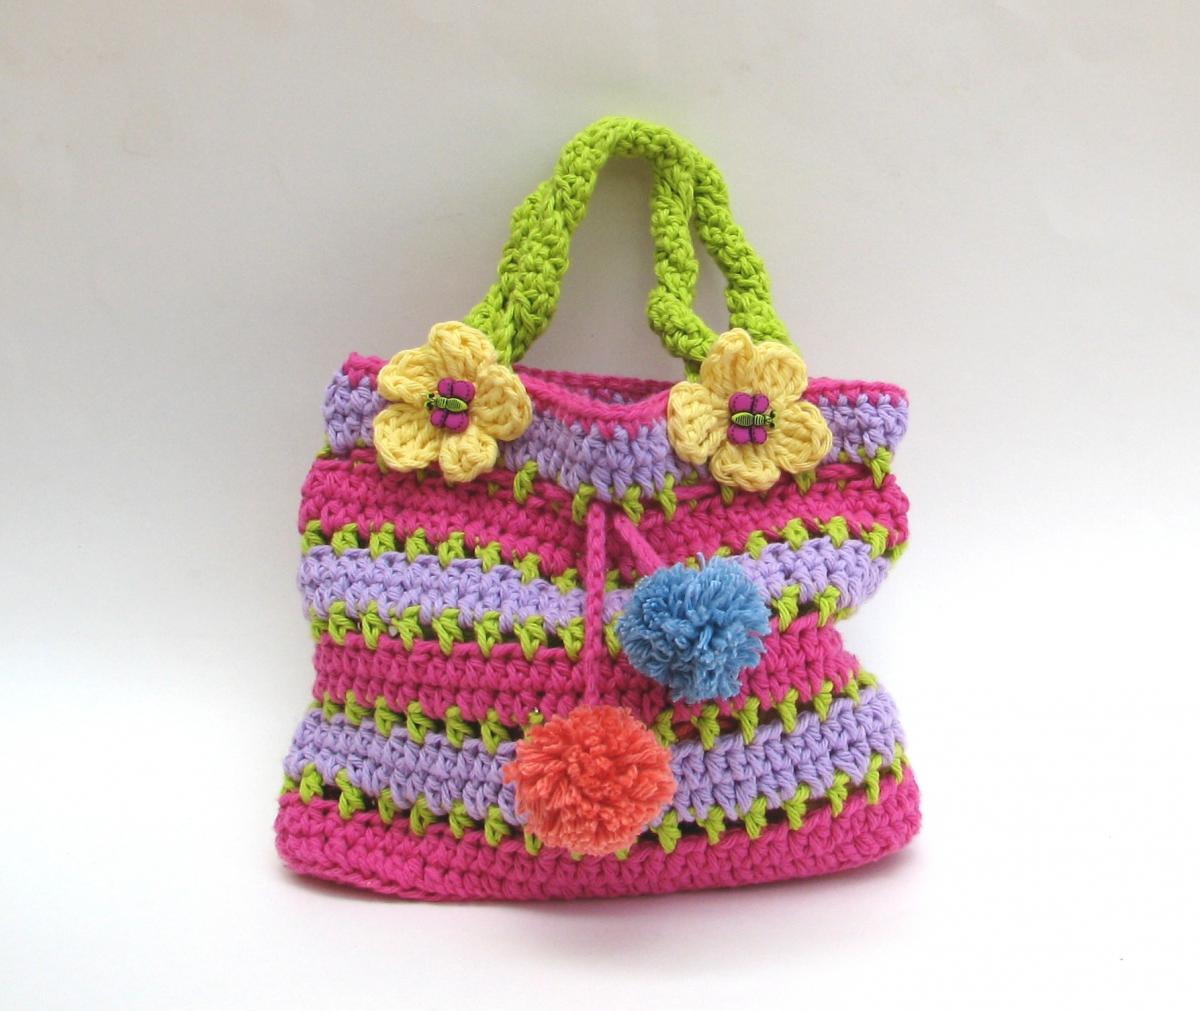 Colorful Girls Bag / Purse, Crochet Pattern Pdf,easy, Great For Beginners, Pattern No. 57